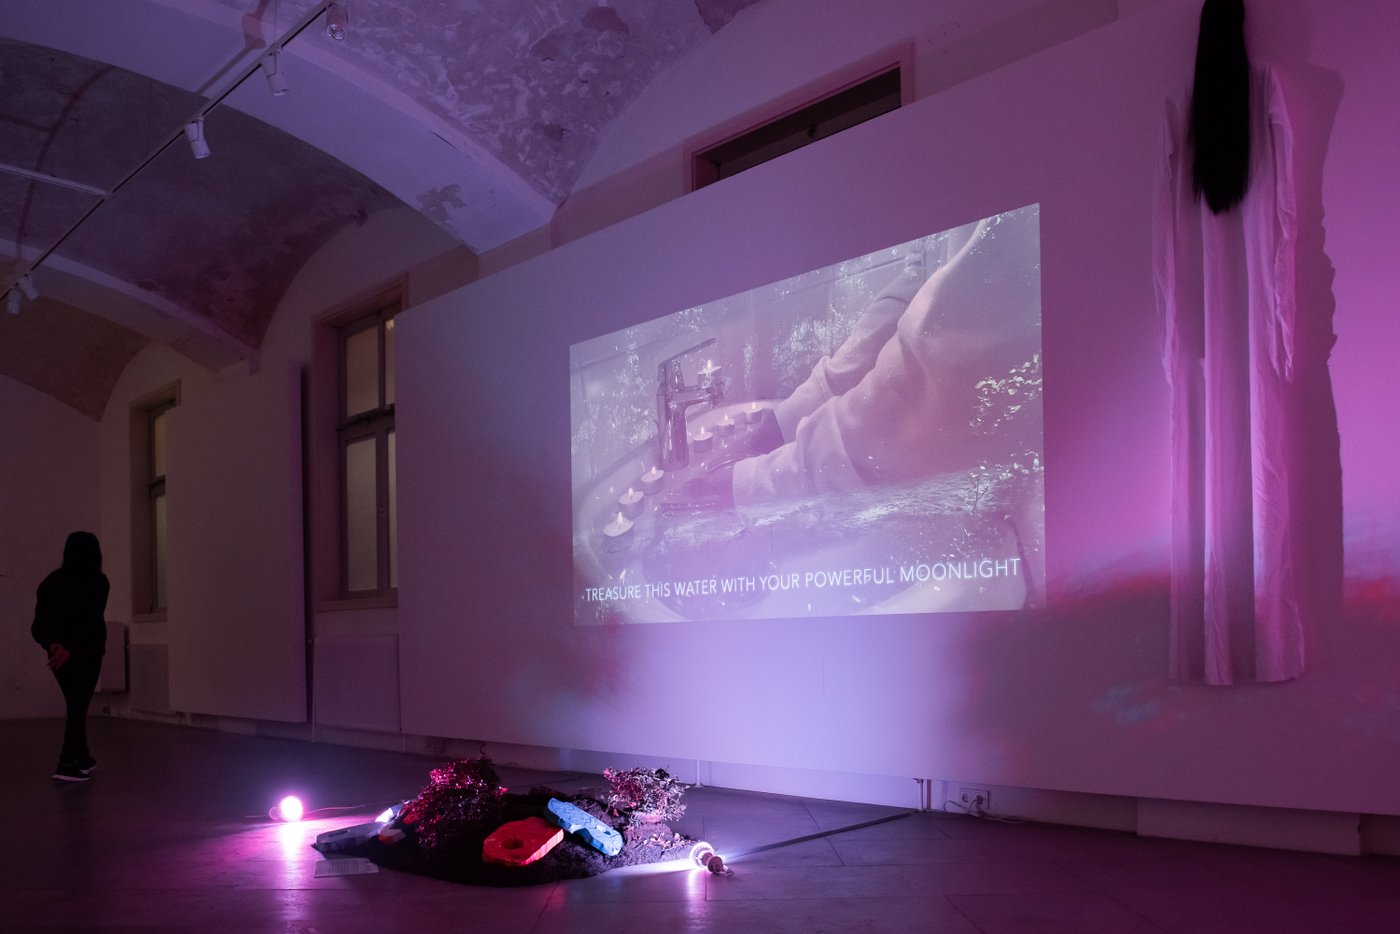 Exhibition view of a room with a video streaming, Still of the Video, the room is colored in pink